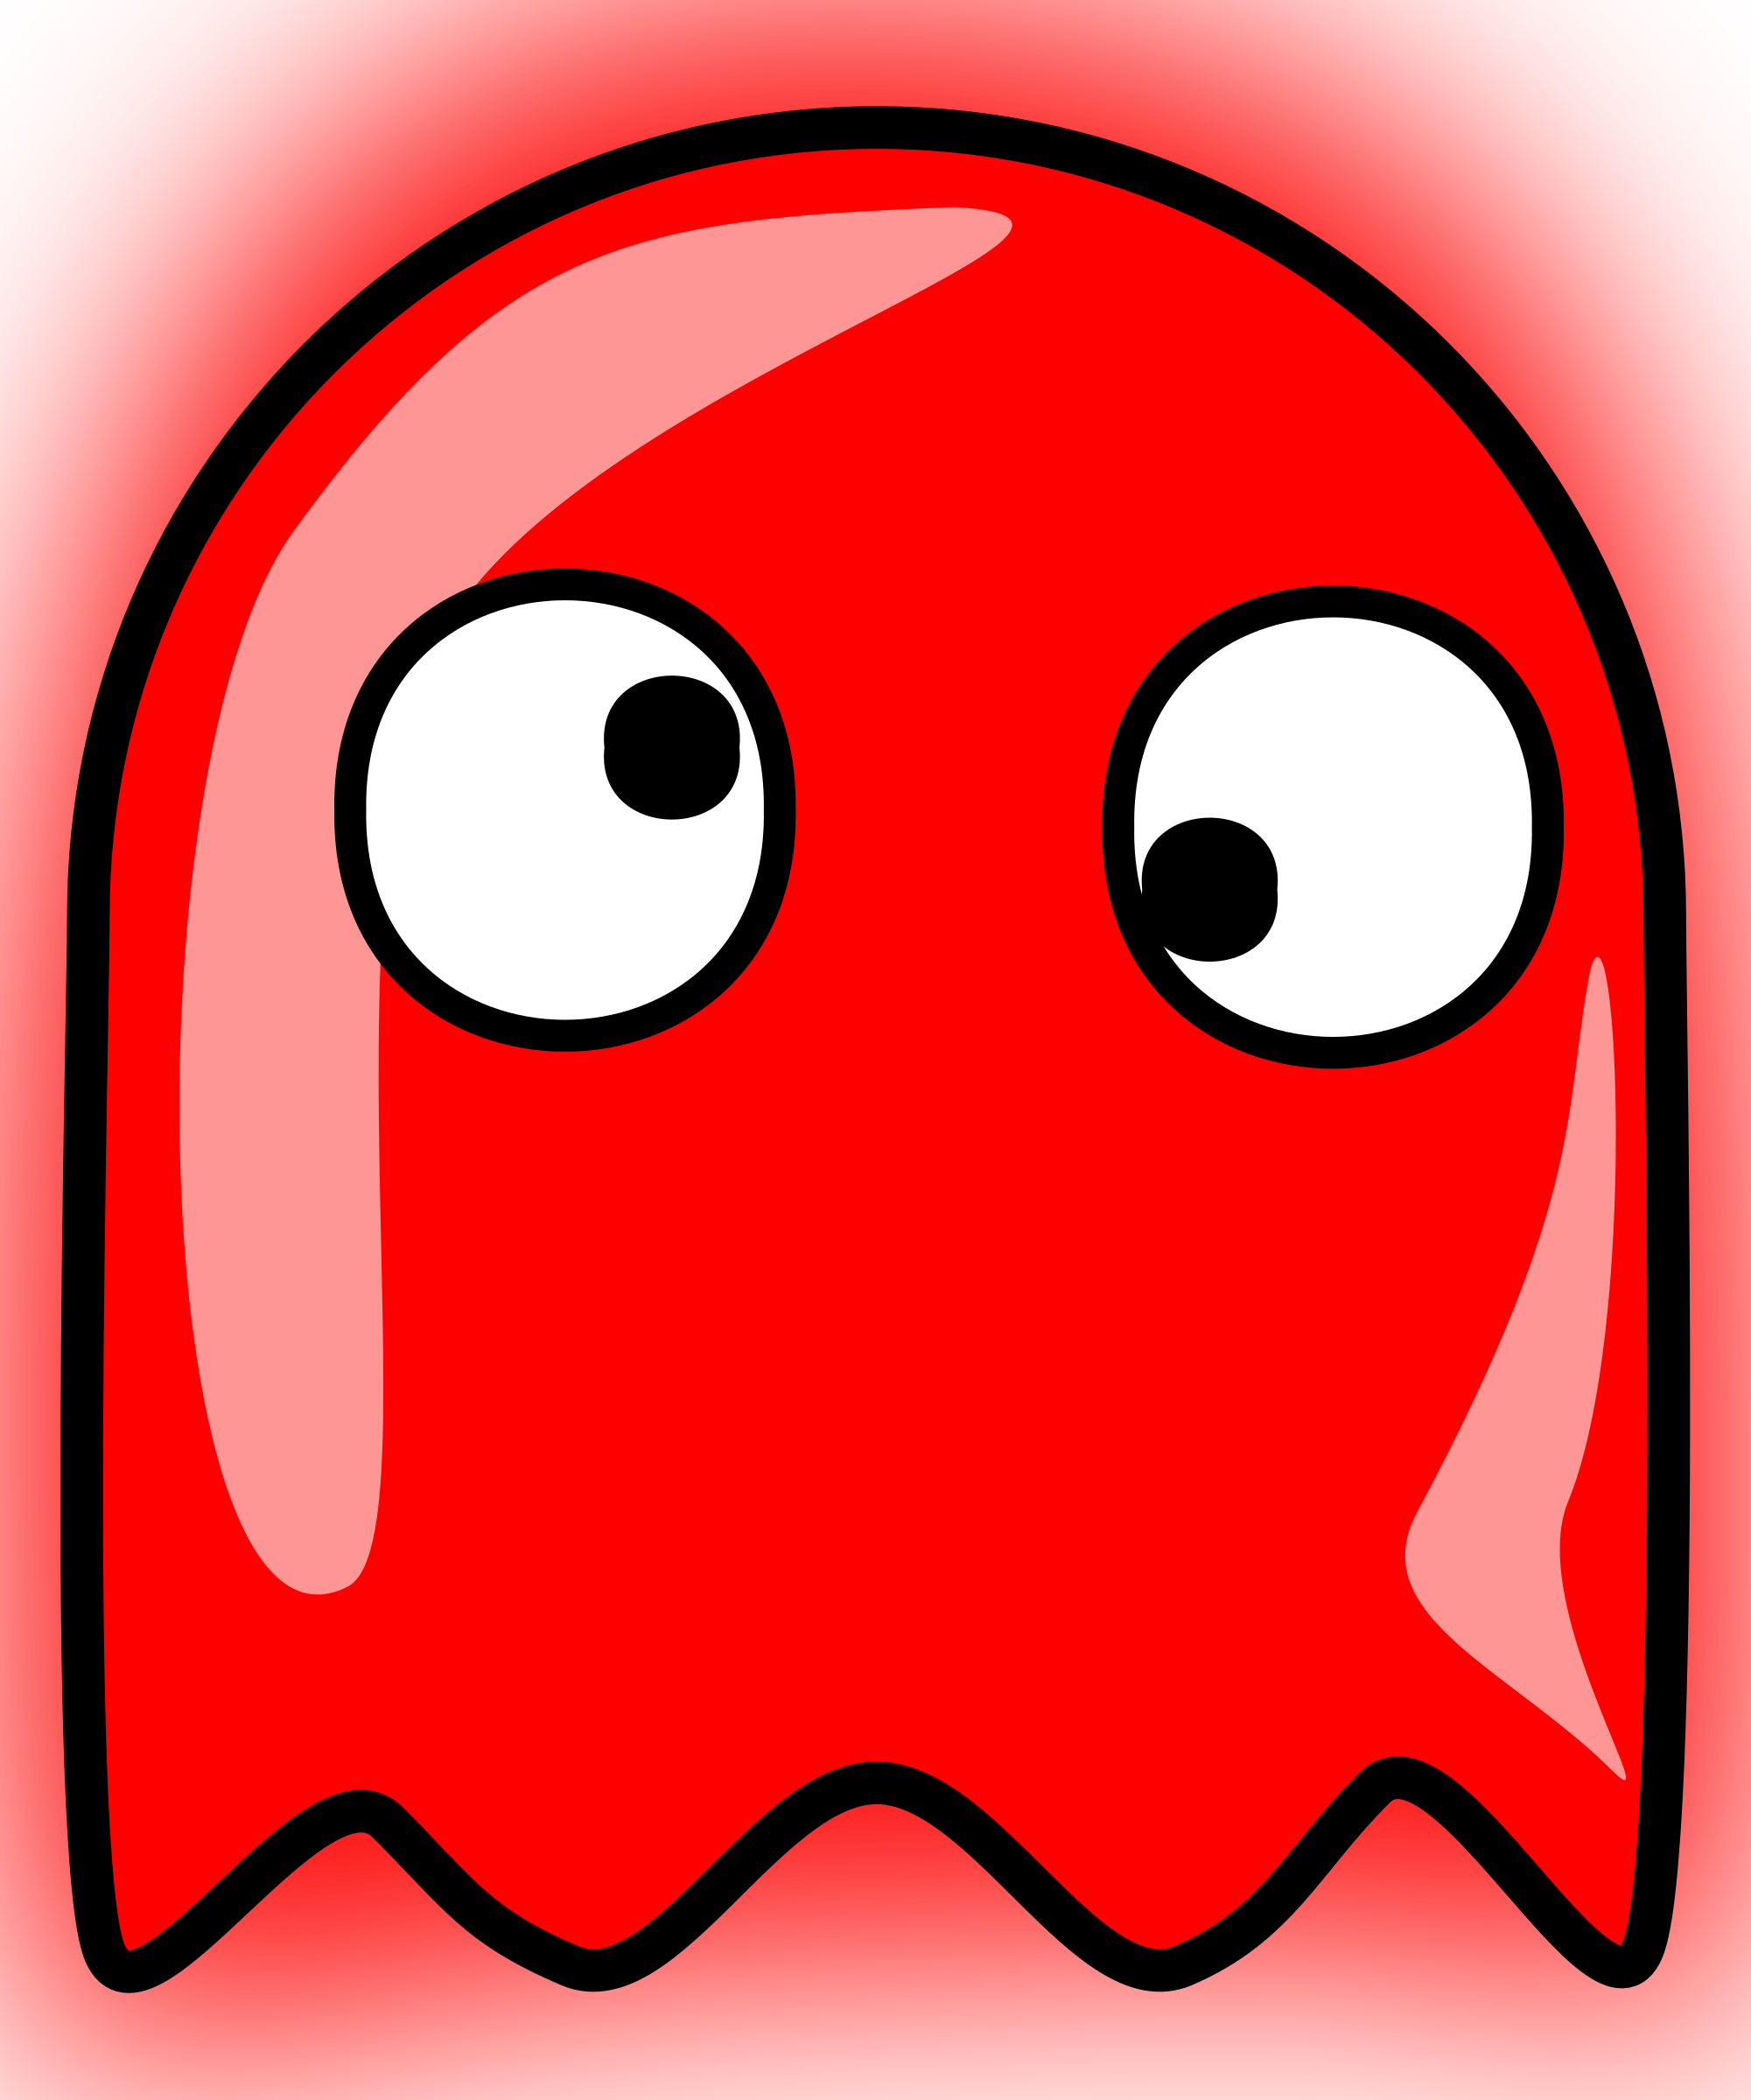 Big image png. Clipart ghost nice